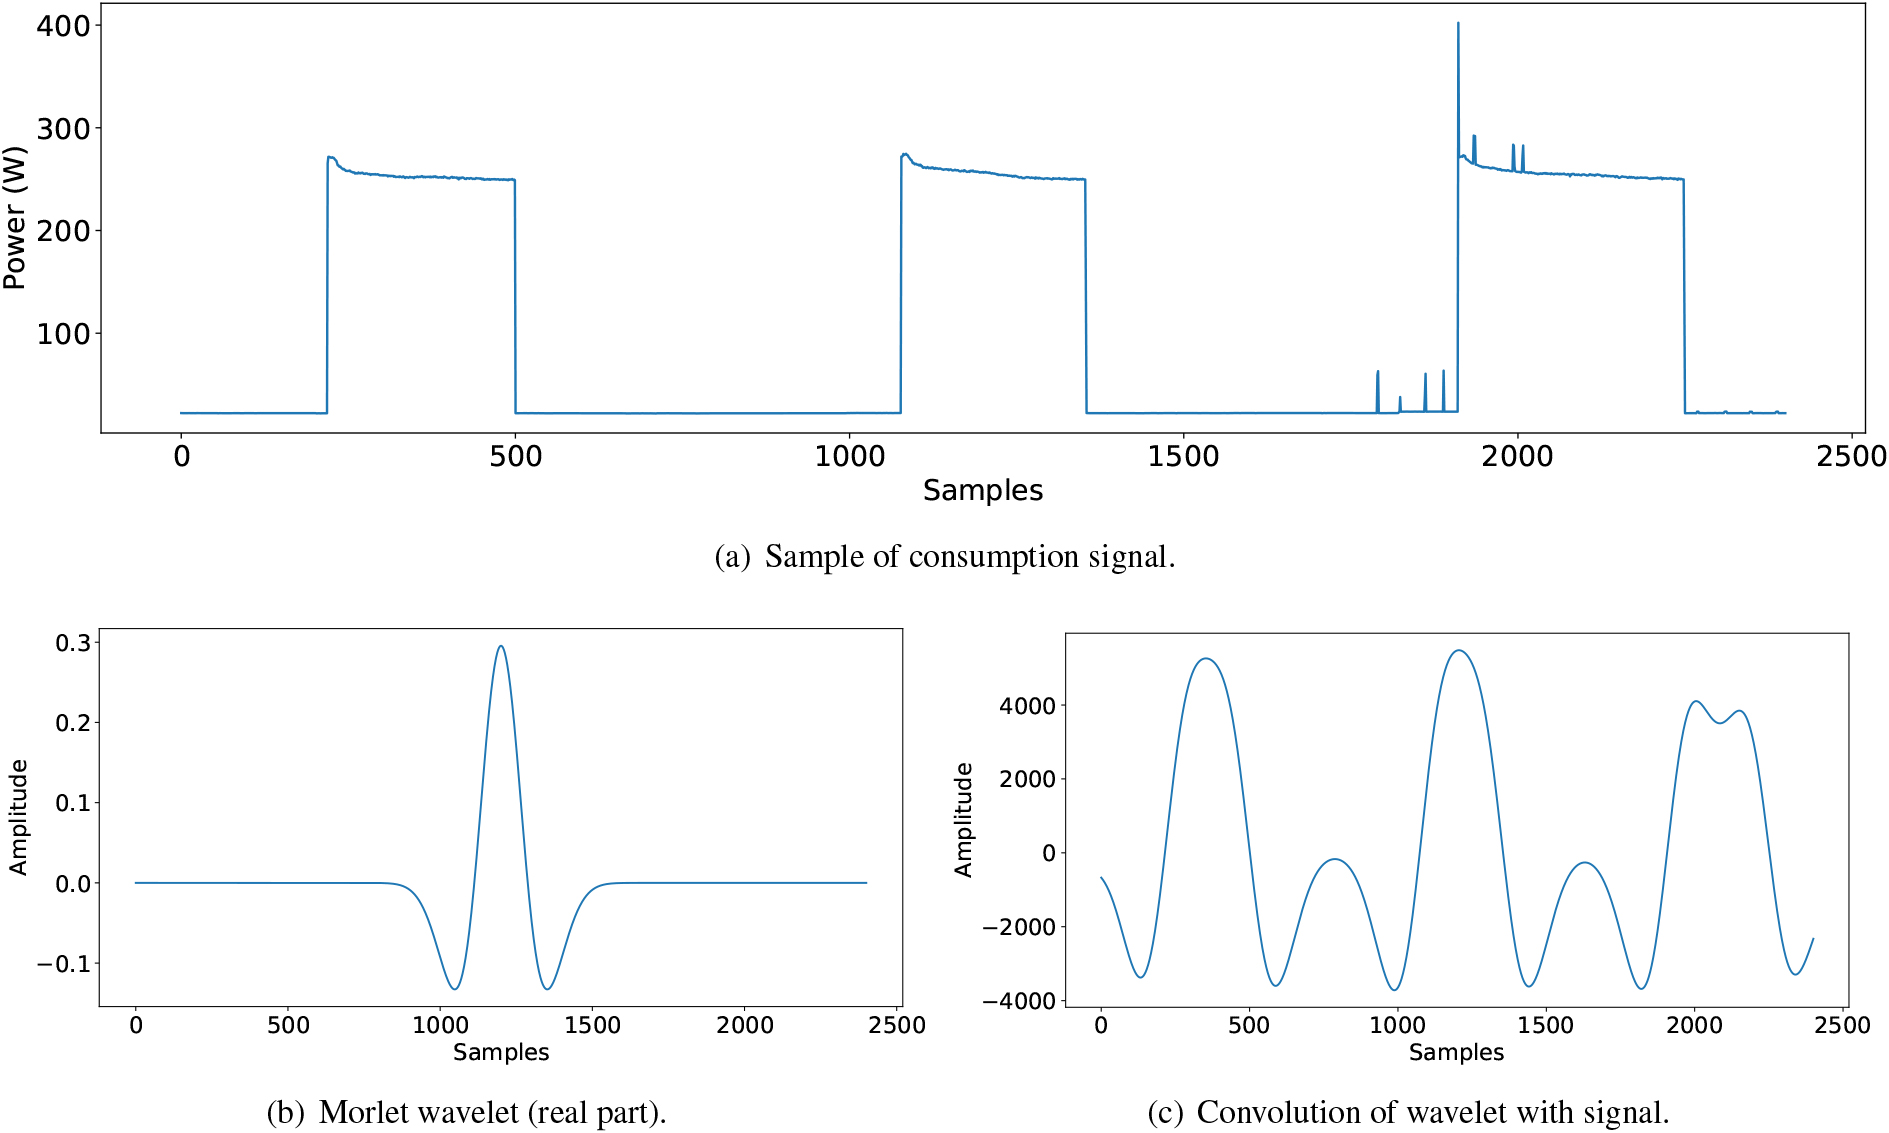 Example of consumption signal (a), wavelet with a width of 1 and frequency of 2 (b), and the convolution of the selected wavelet with the signal (c).